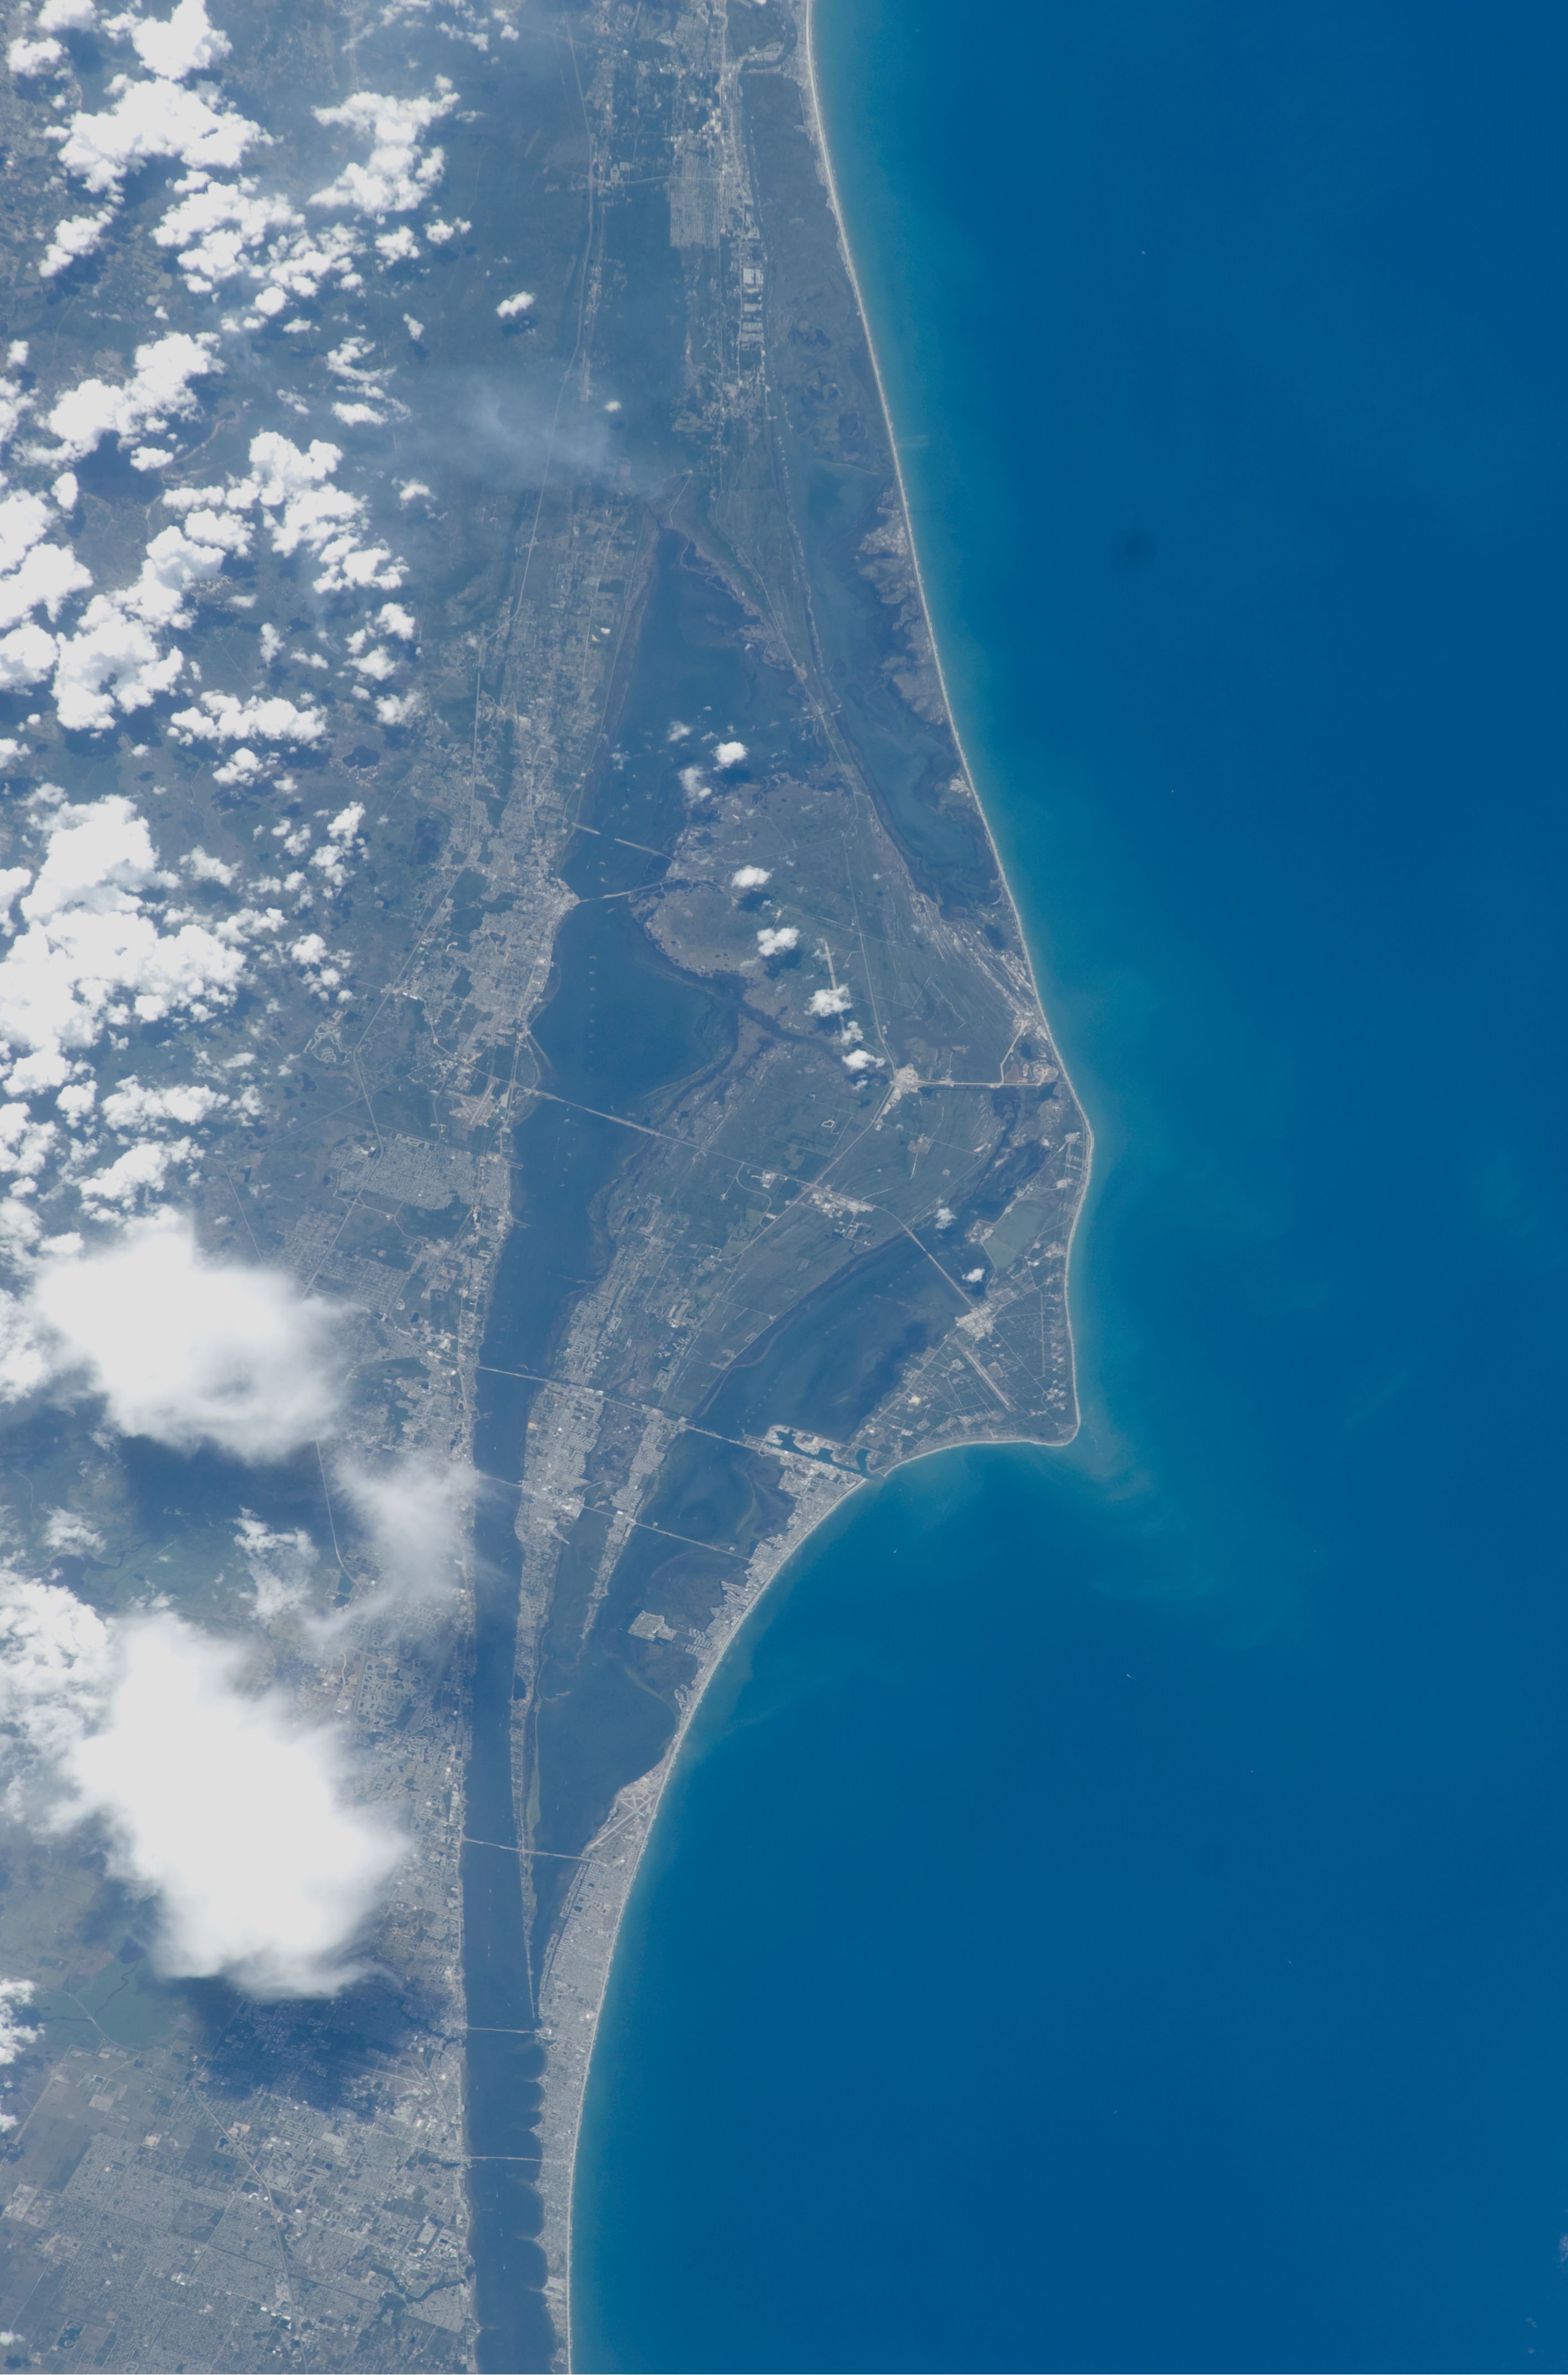 The Cape Canaveral area in Florida